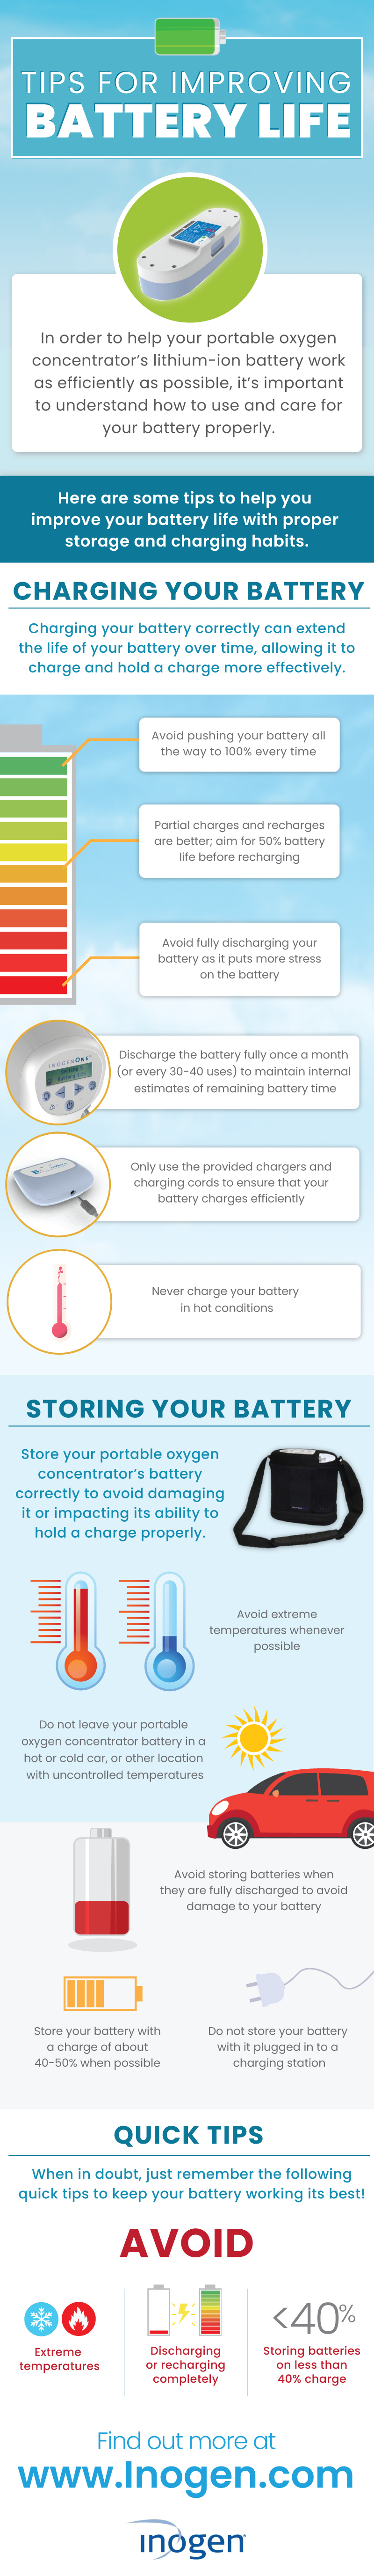 Tips for Improving Inogen Portable Oxygen Concentrator Battery Life Infographic